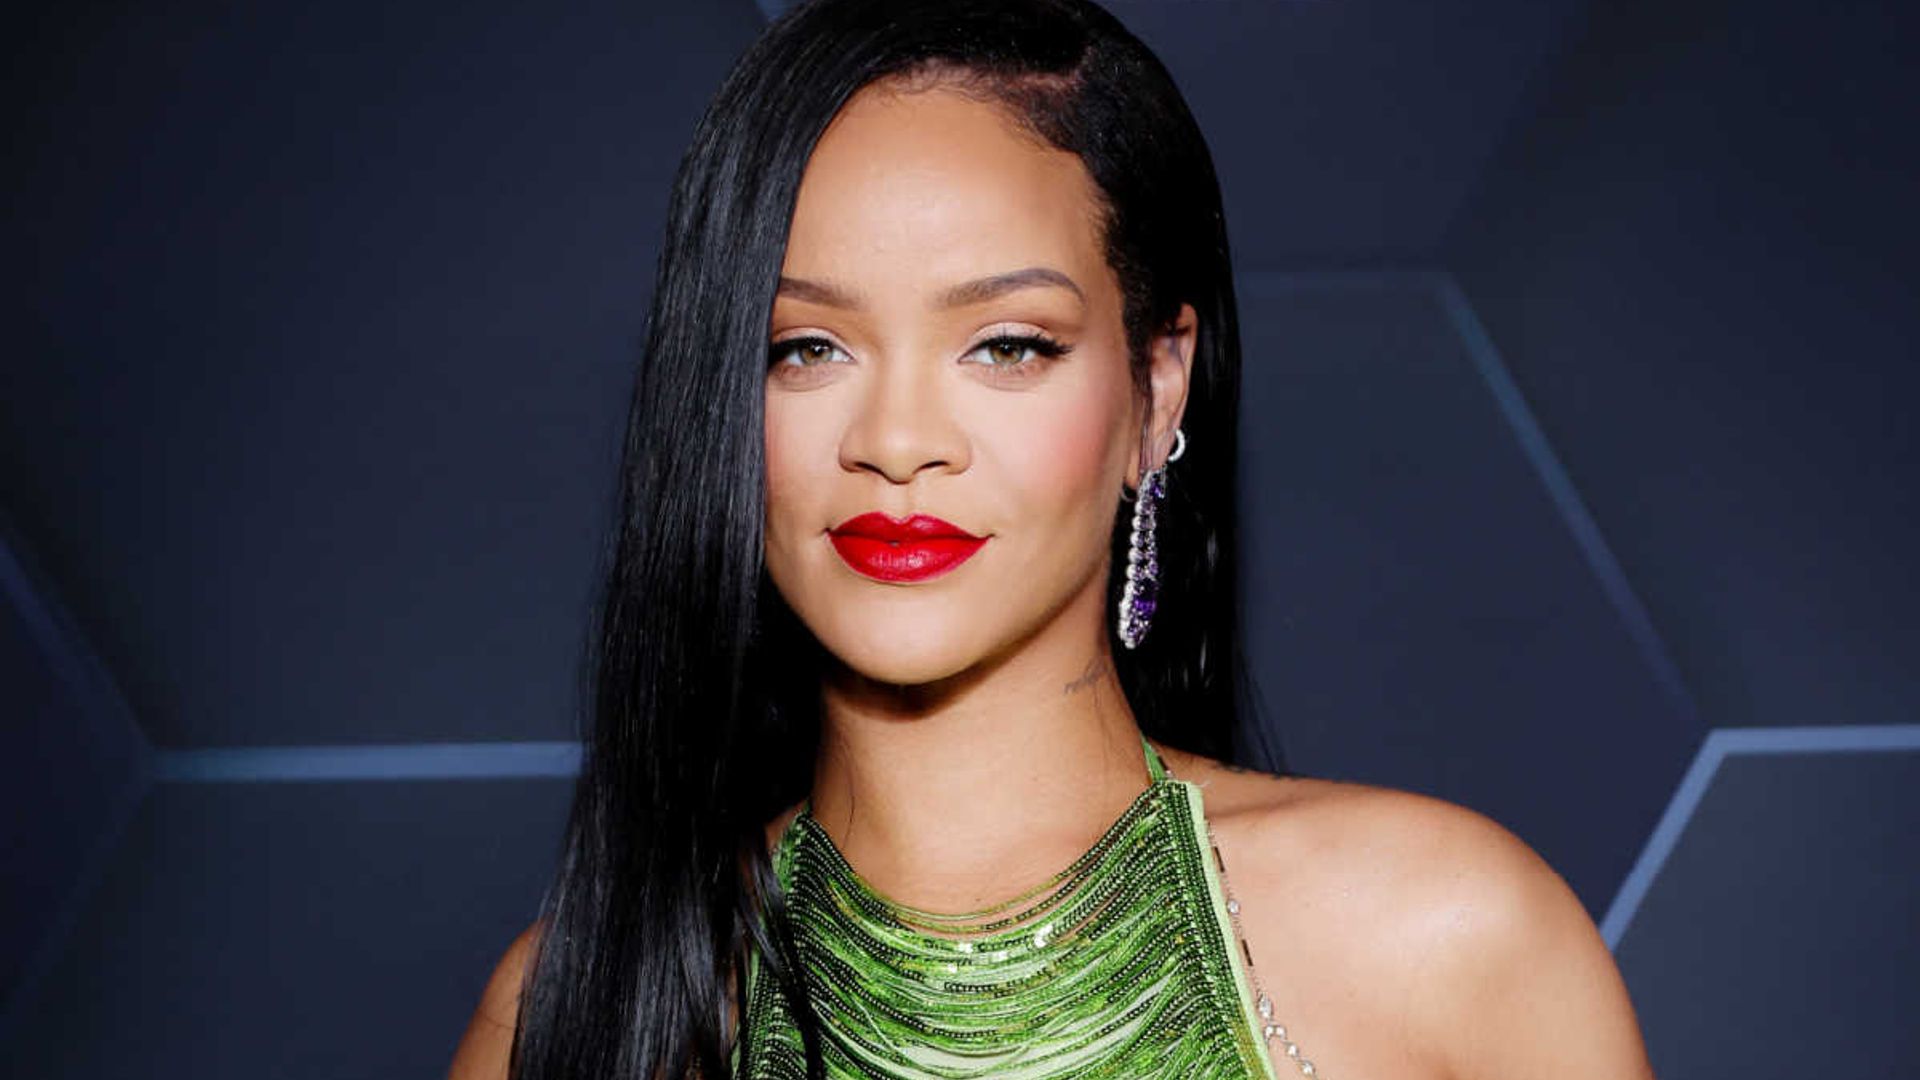 Color cosmetics line Fenty Beauty is changing the rules for celebrity brands